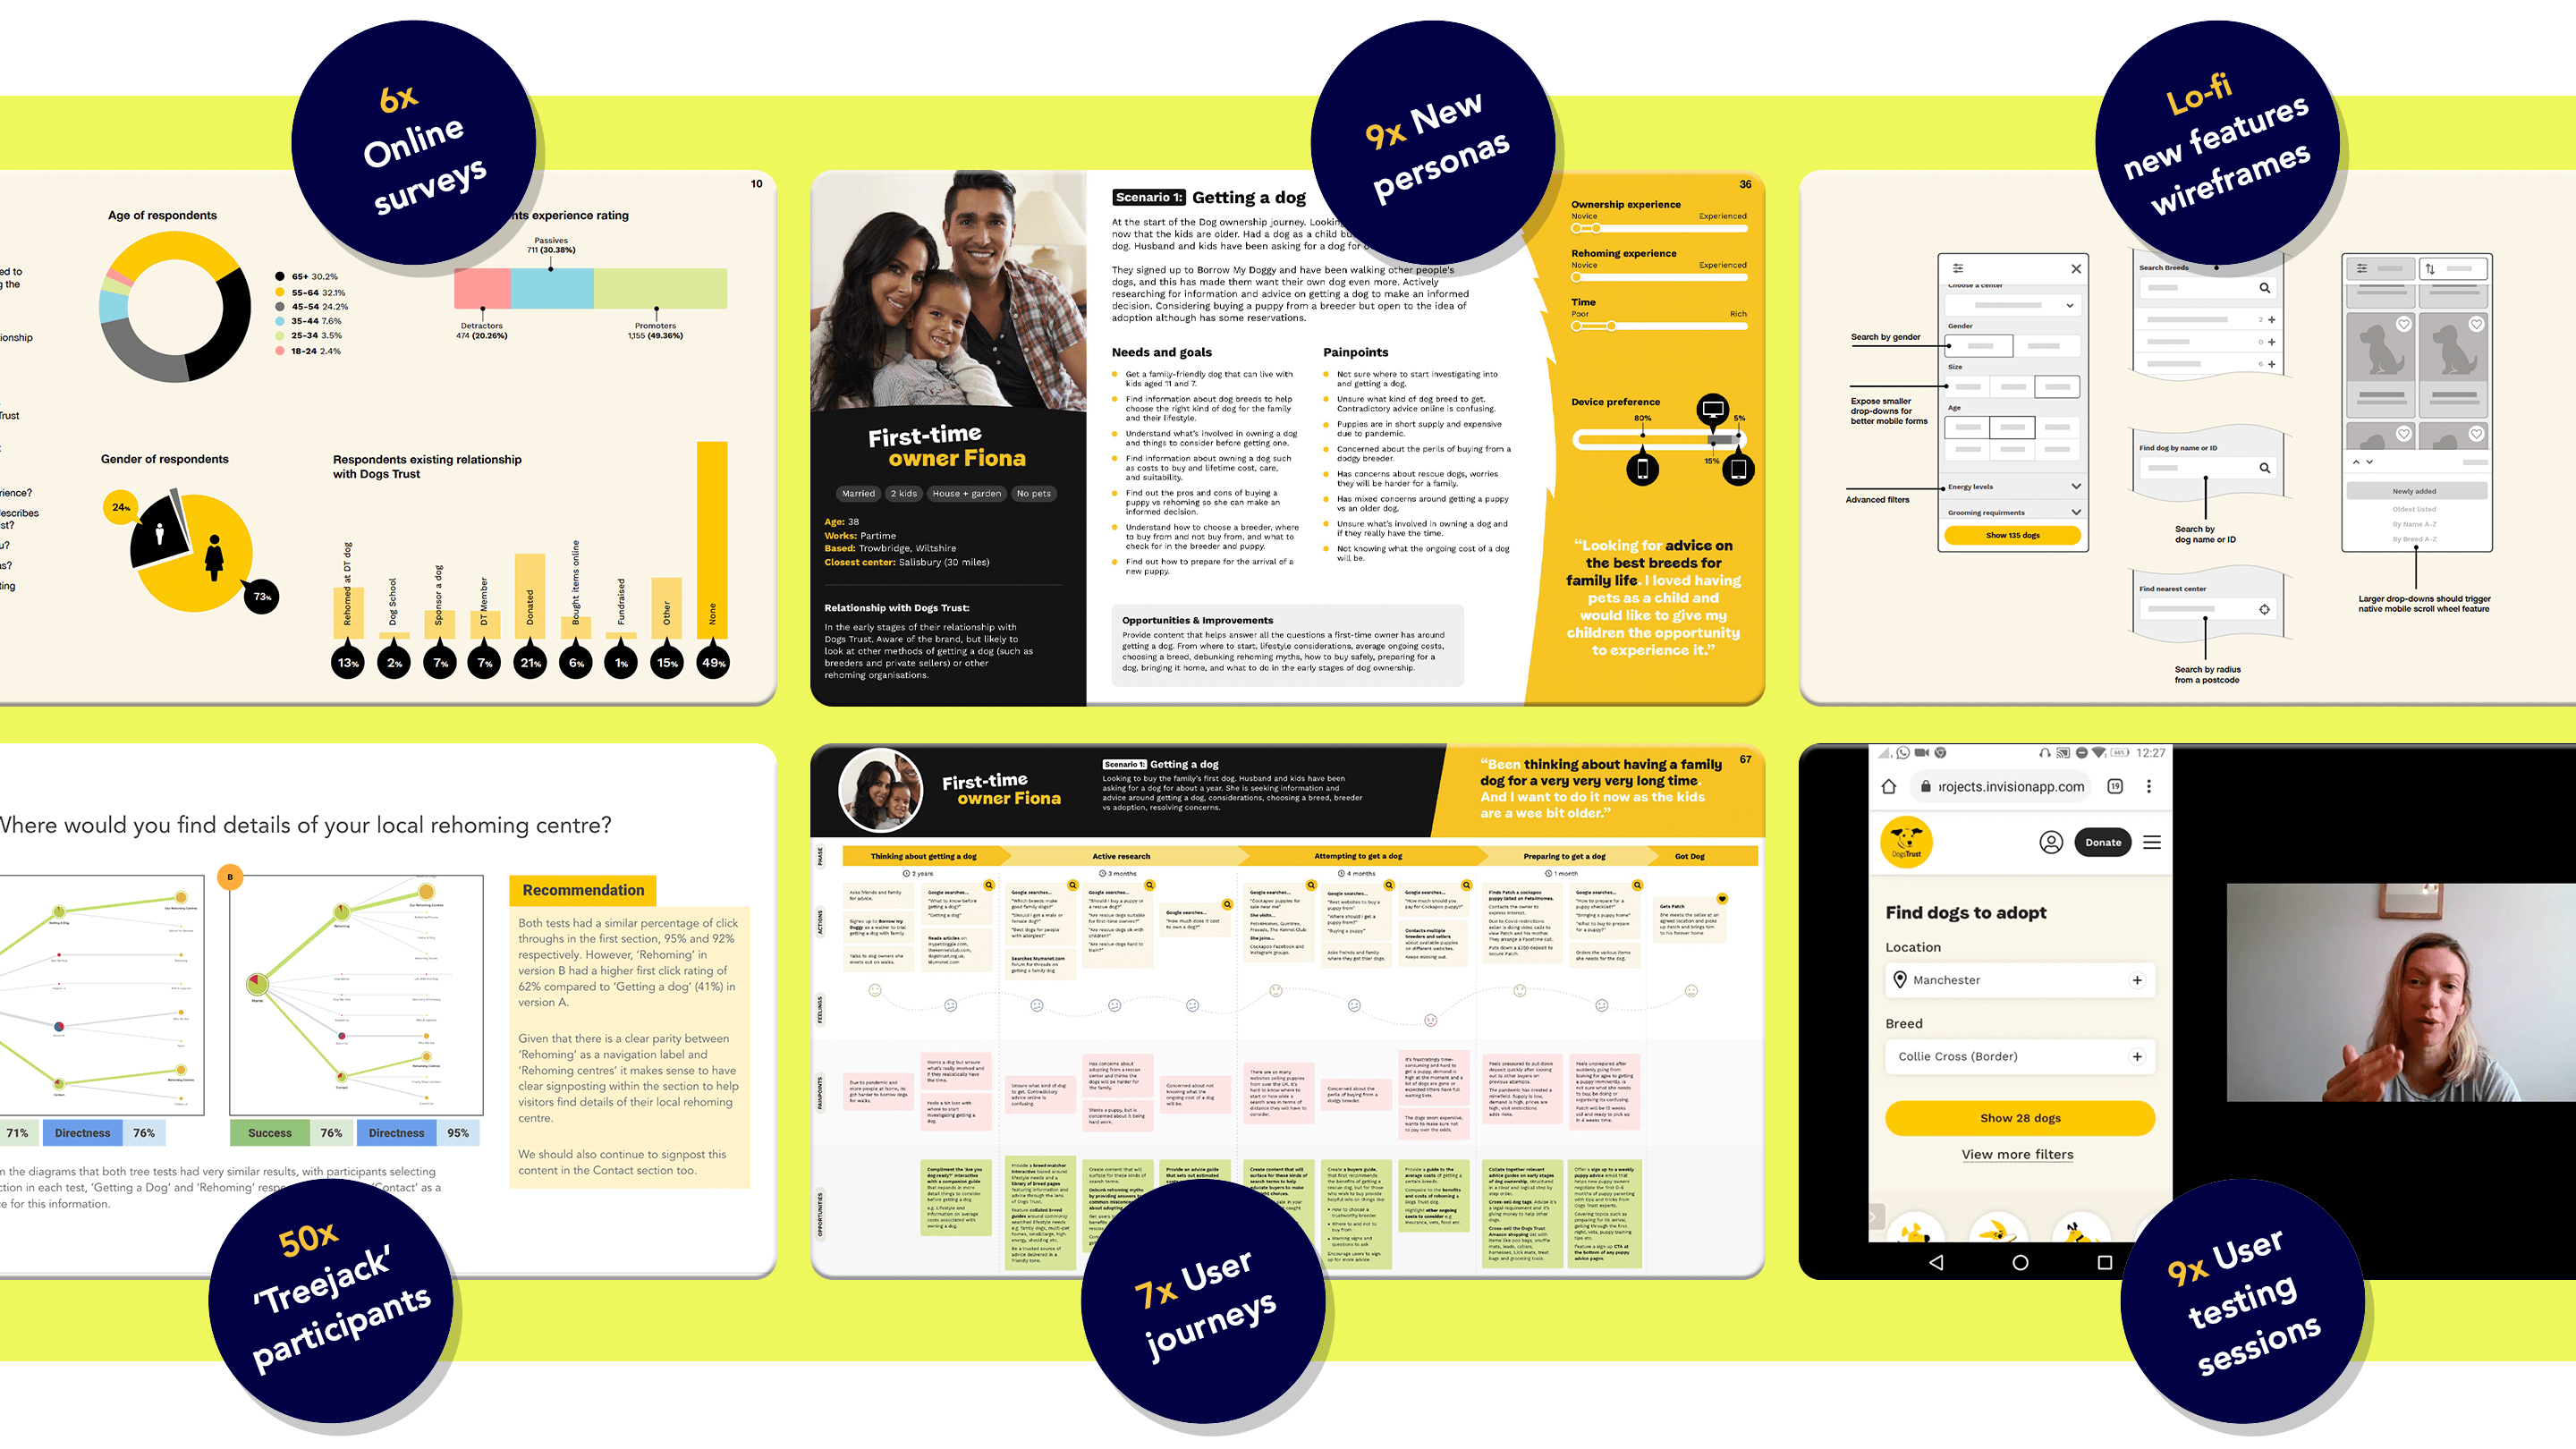 Examples of UX and research done in discovery